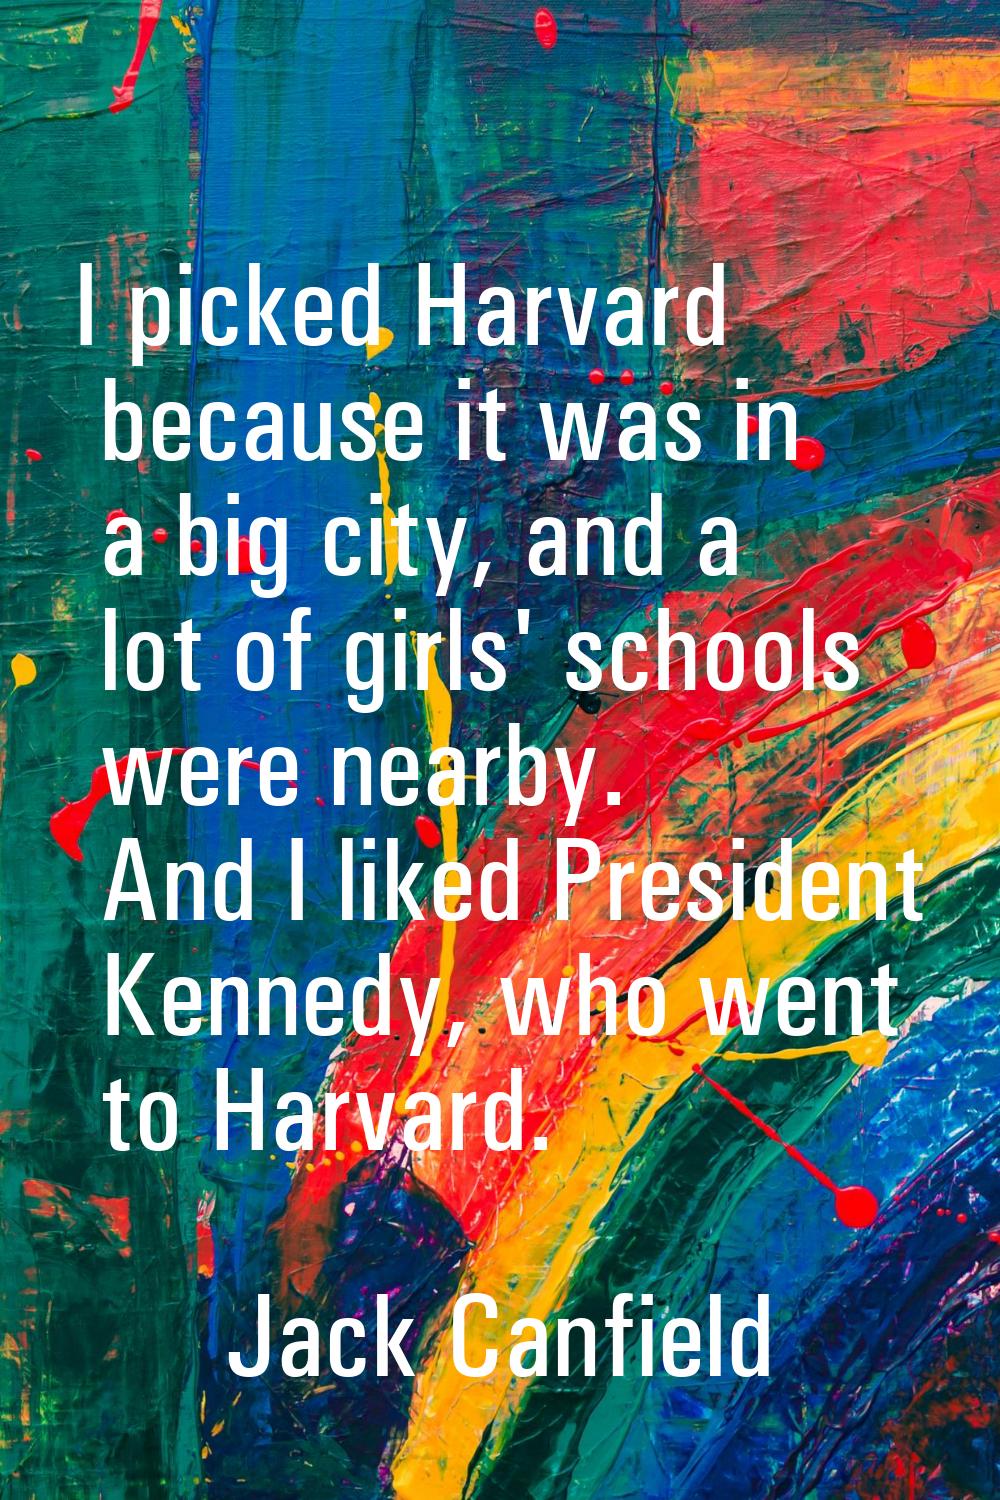 I picked Harvard because it was in a big city, and a lot of girls' schools were nearby. And I liked